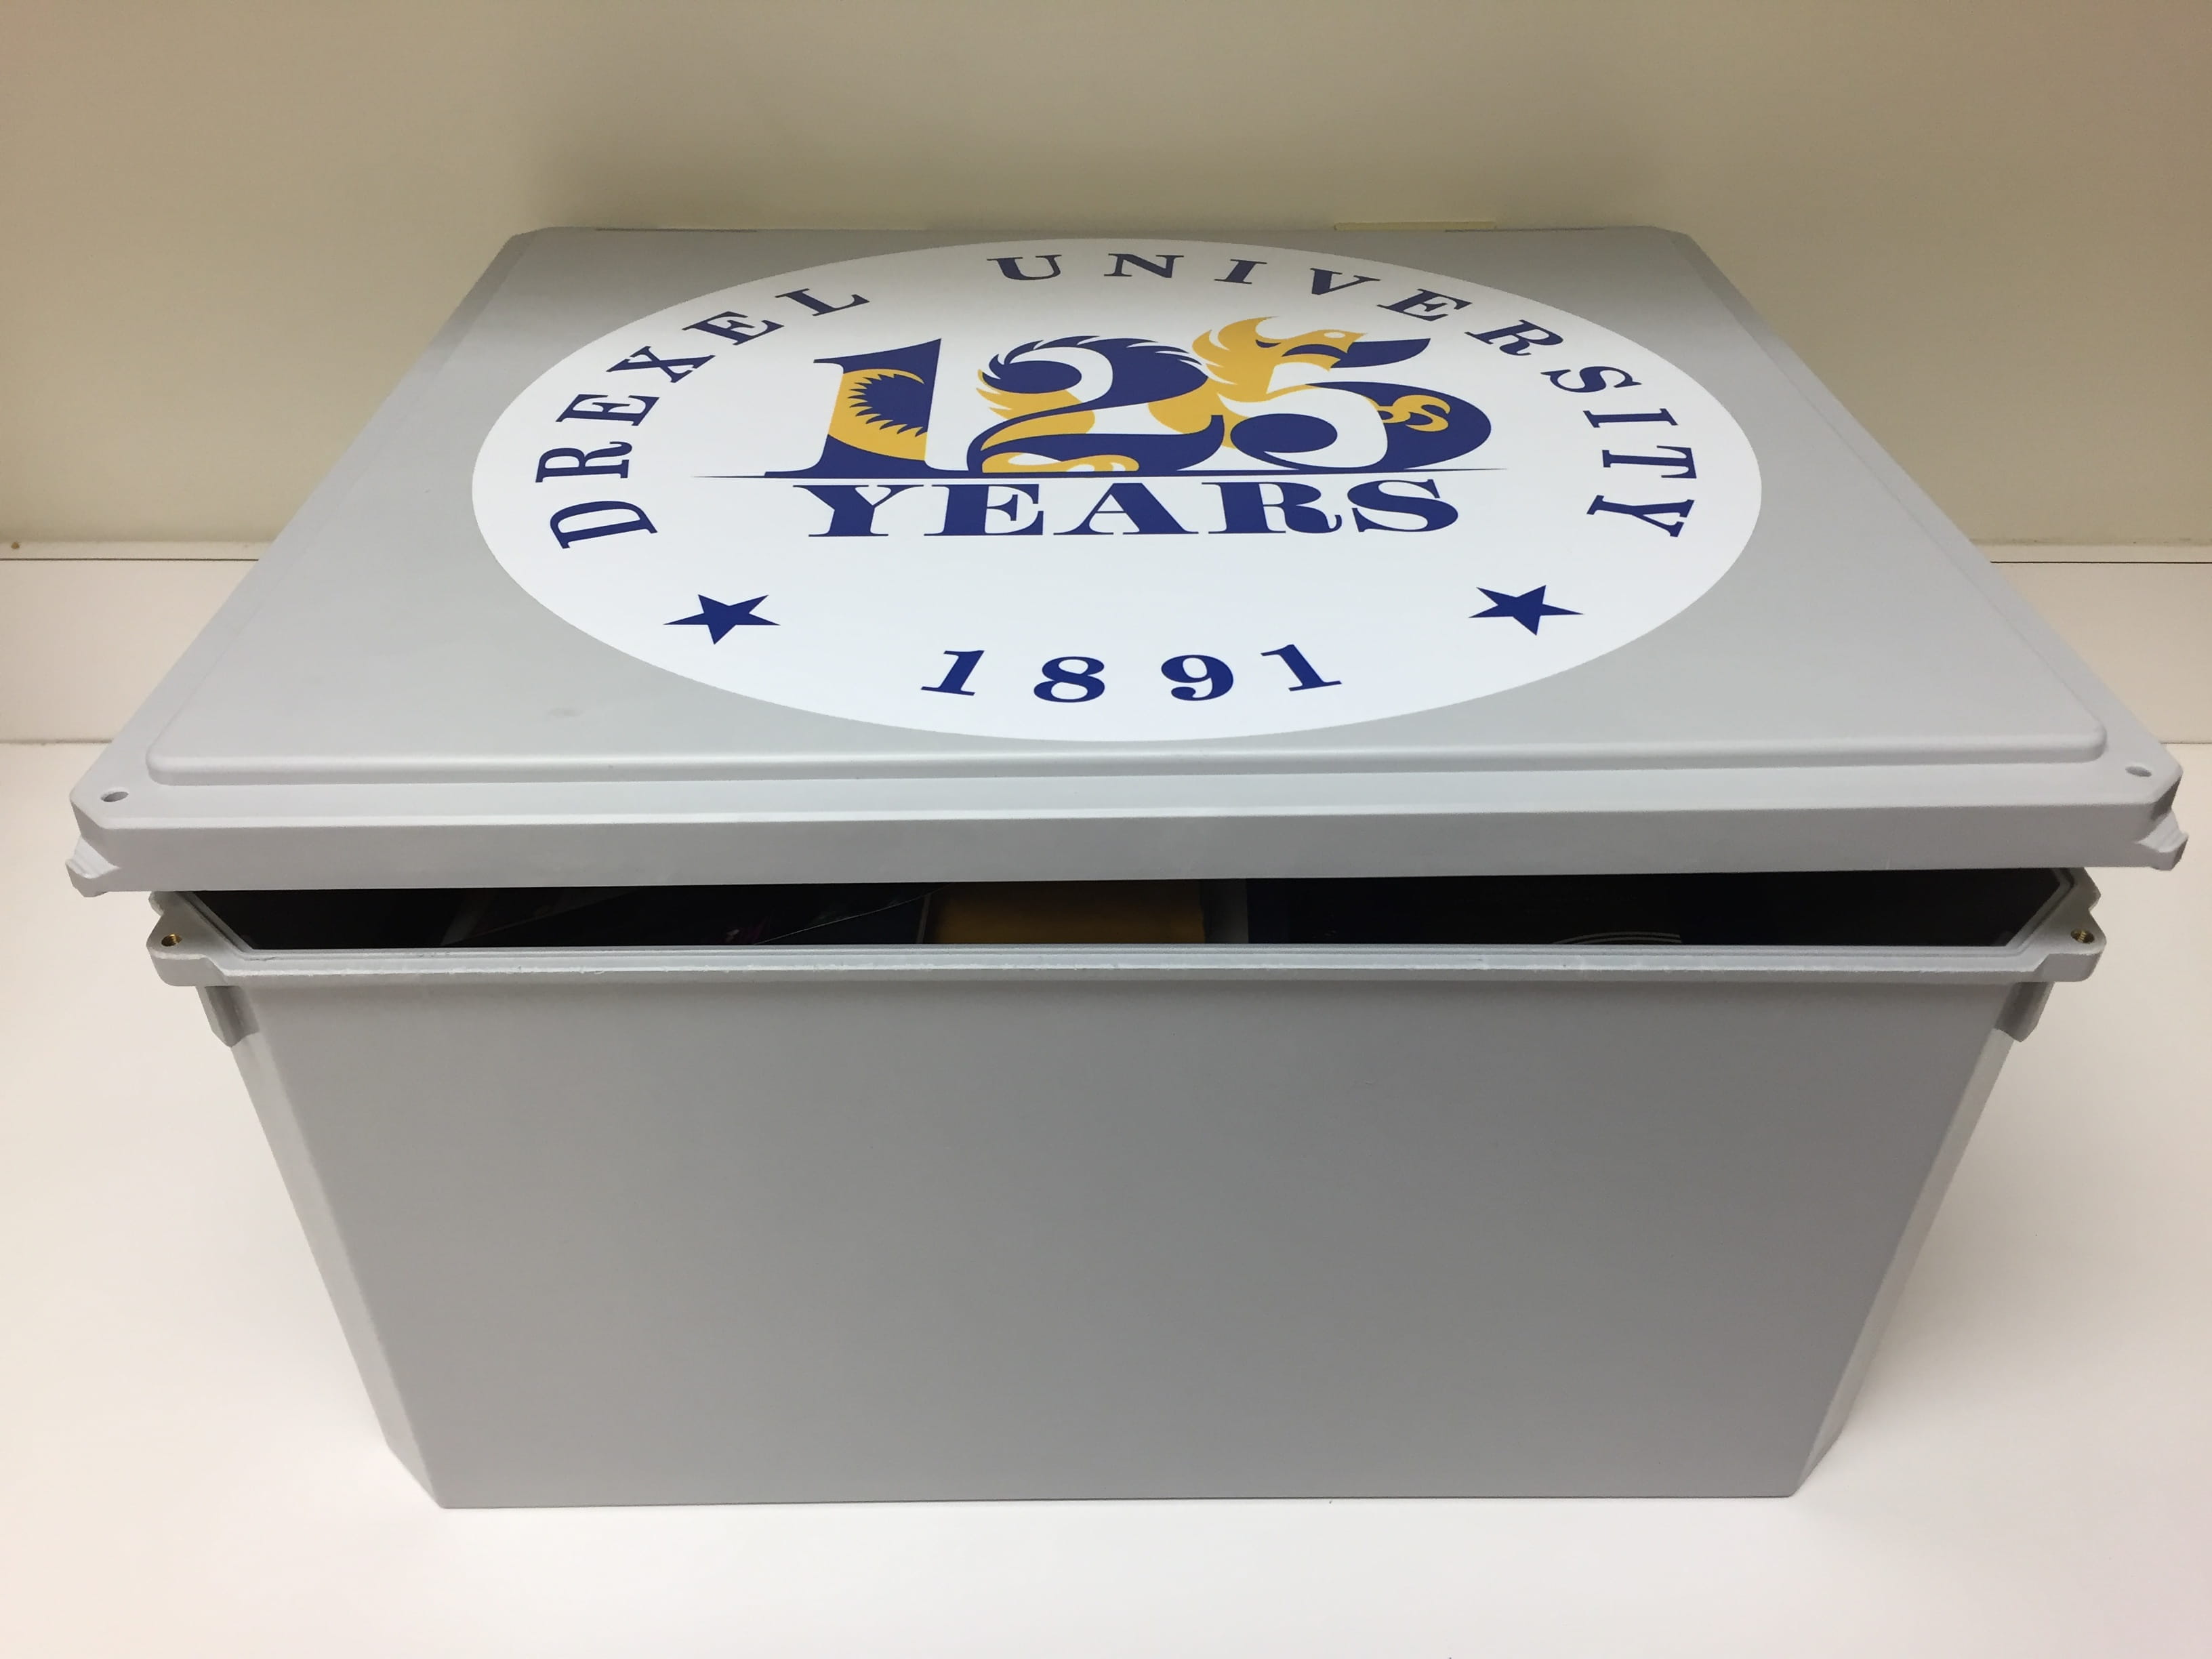 The official time capsule that will be buried for Drexel's 125th anniversary.